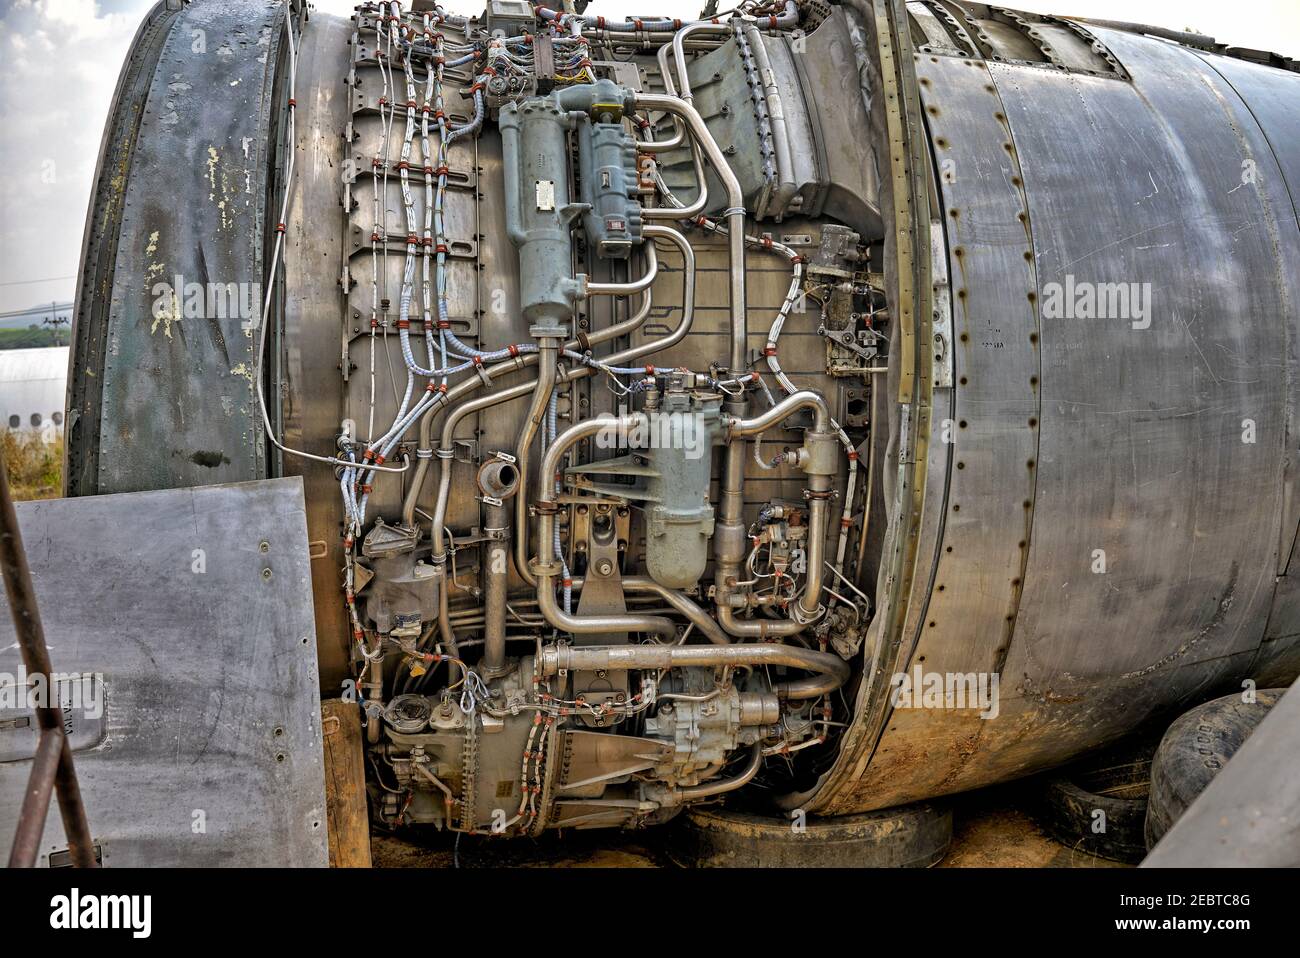 Jet engine detail, Aircraft engine exposed for maintenance and inspection Stock Photo